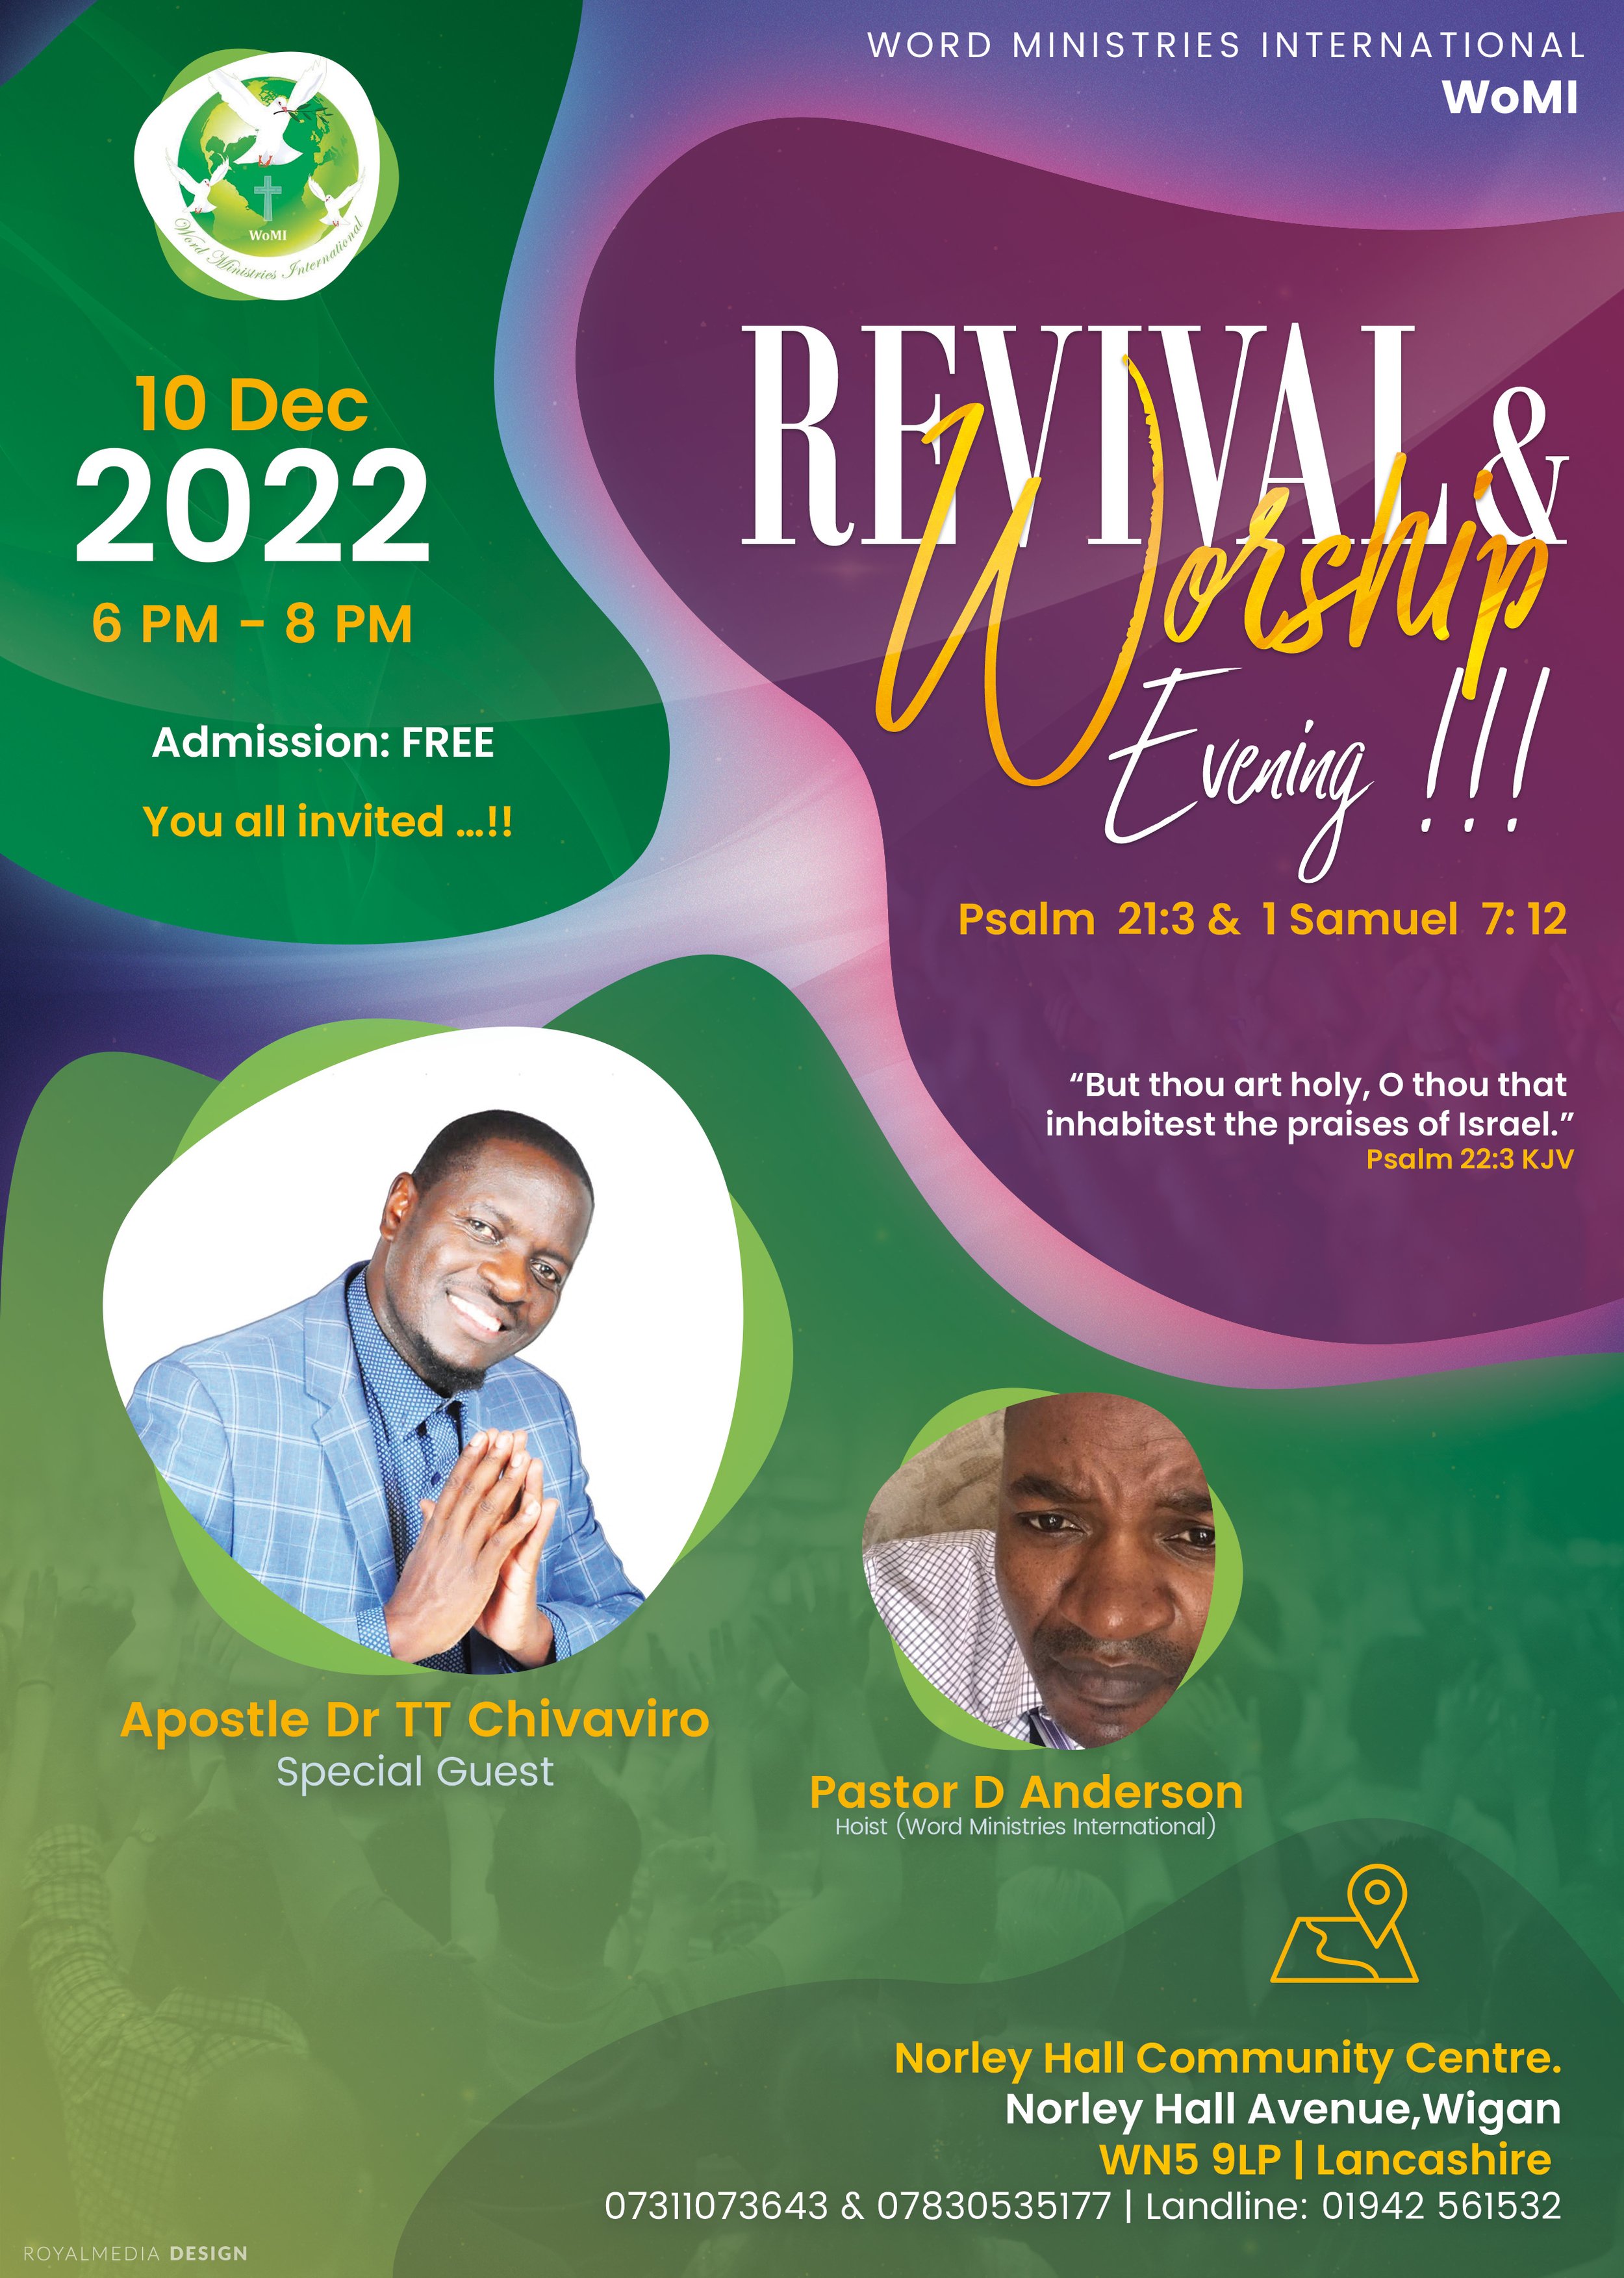 Revival and Worship Evening …!!!.jpg